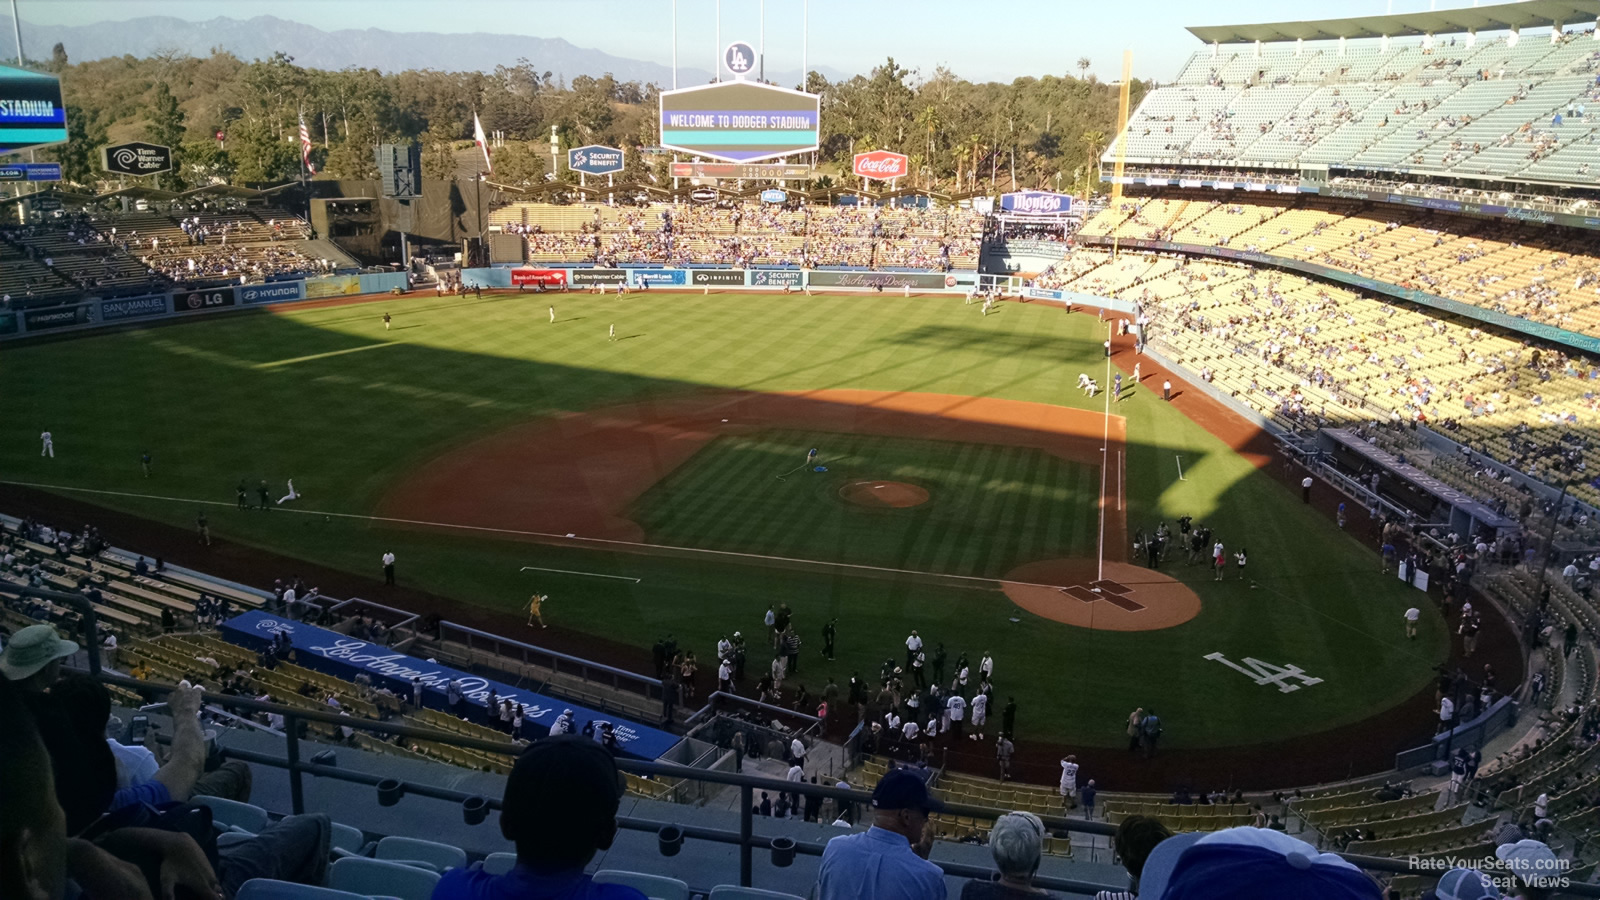 Seats in the sun down the first base line at Dodger Stadium